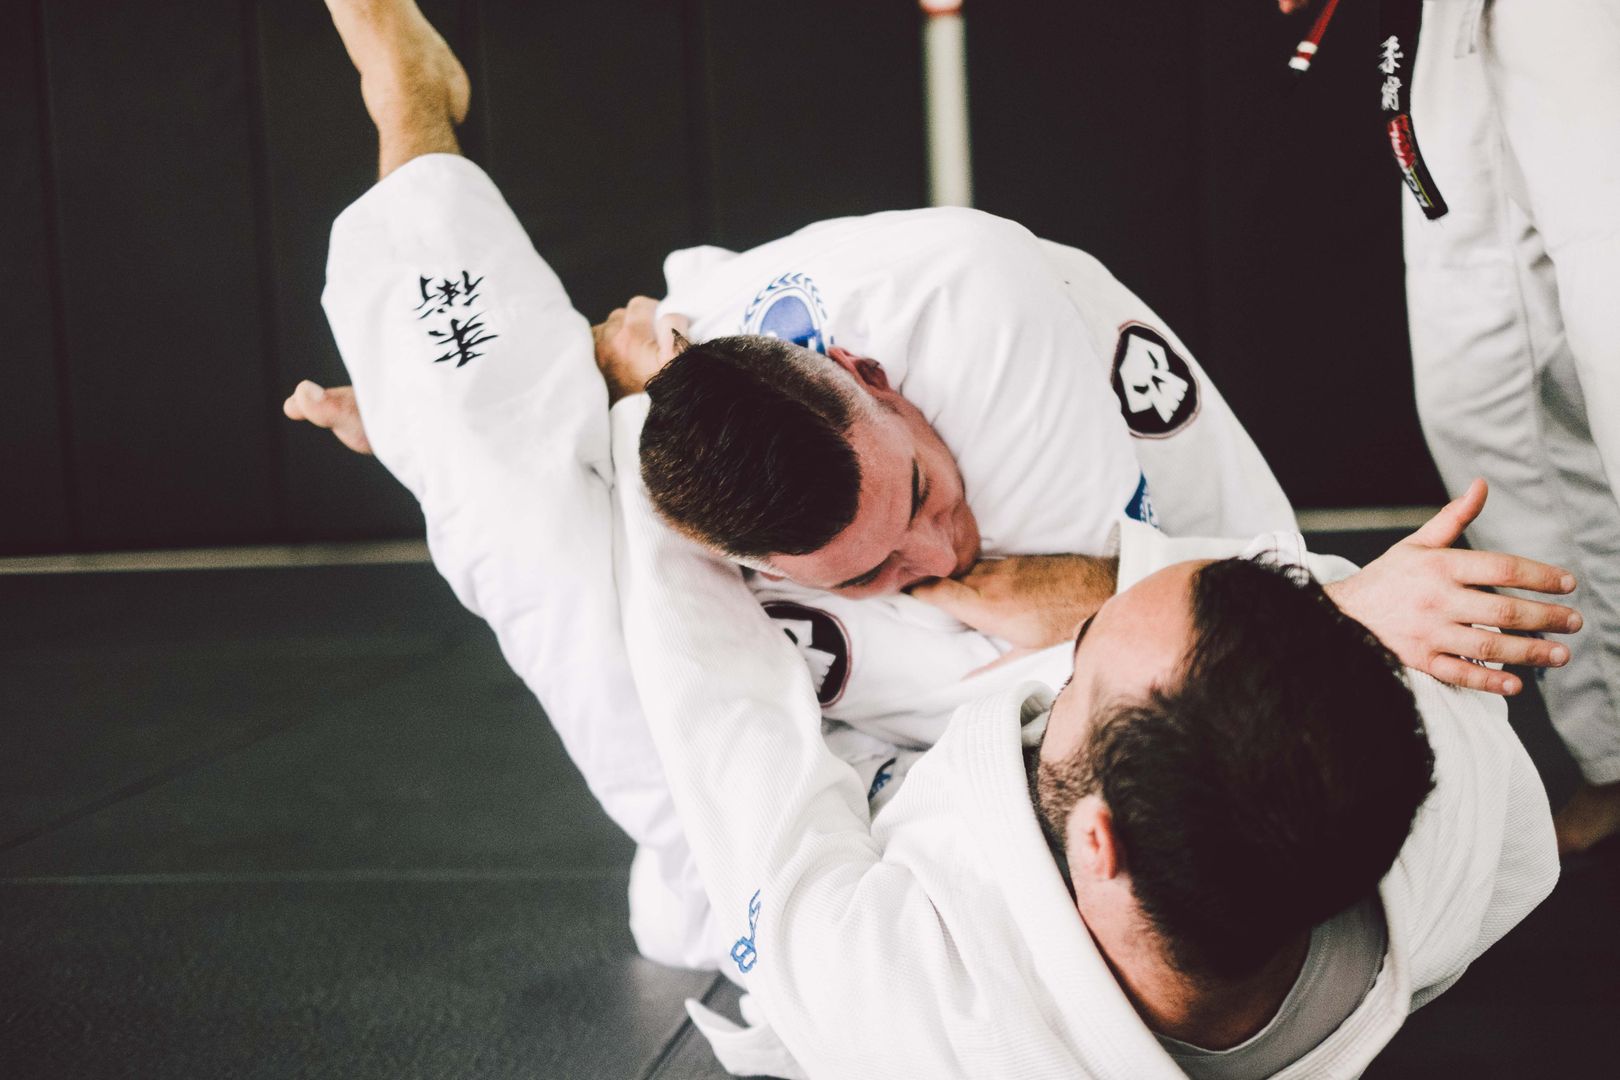 Grappling is an intense physical activity that burns lots of calories.